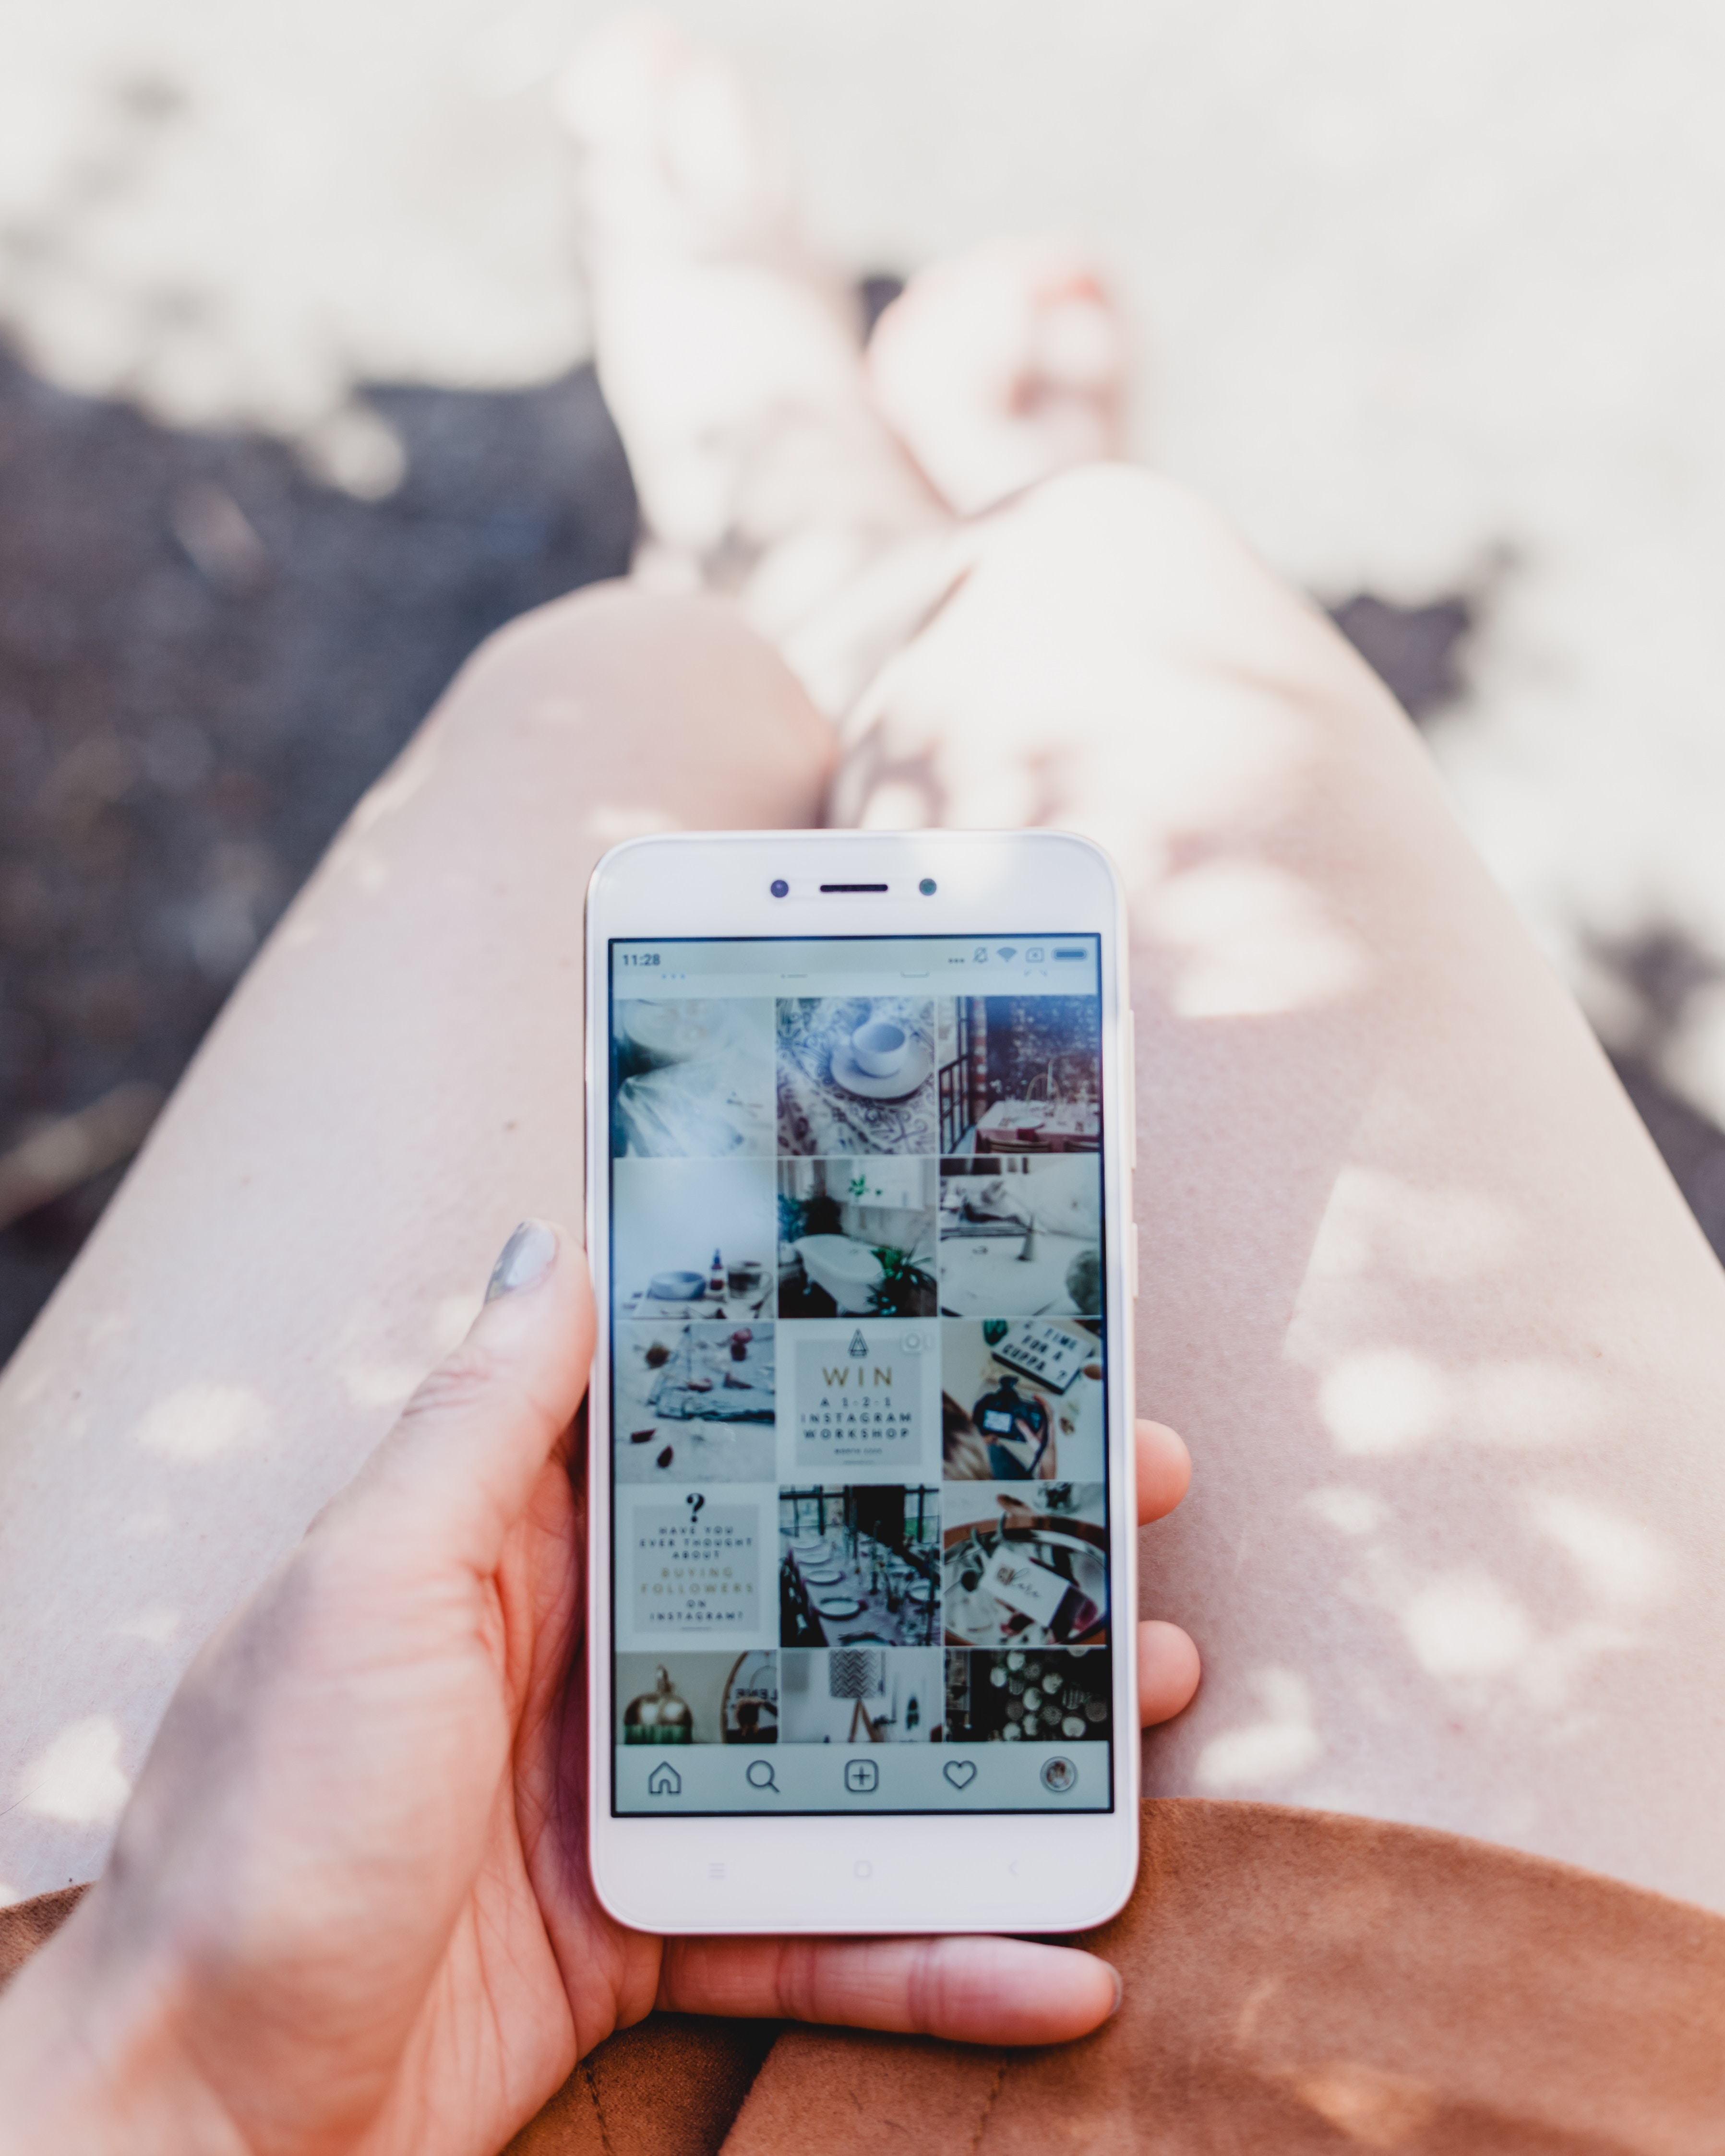 3 Ways To Increase Your Impact & Income On Instagram